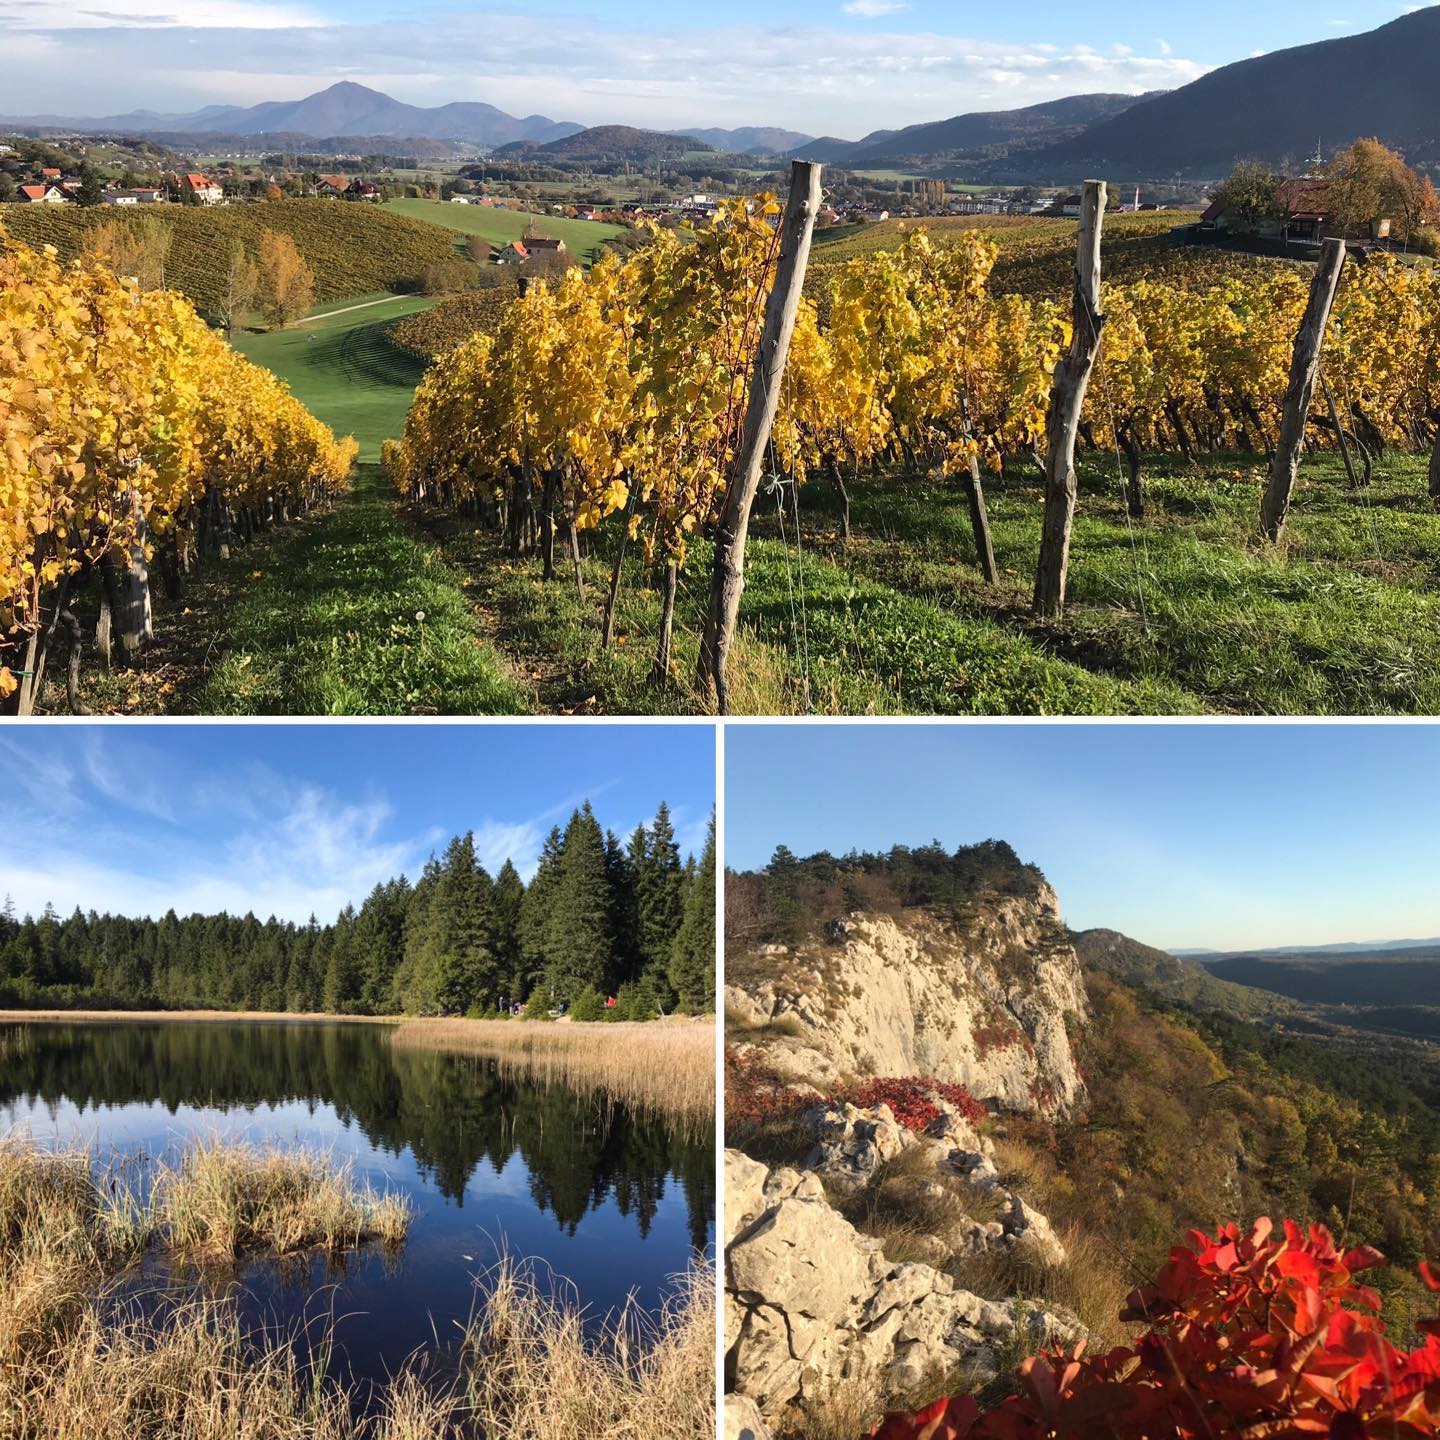 We hope that You are/were able to enjoy beautiful and colorful autumn time.Many Perfect #hiddengem in Slovenia 🇸🇮 for Vandrovc-Globetrotter travelers adventures. 👉www.vg-guides.com for tips or join our scheduled hiking tours.Small groups with other enthusiasts - perfect for solo travelers. 👉Tag someone who would love it.